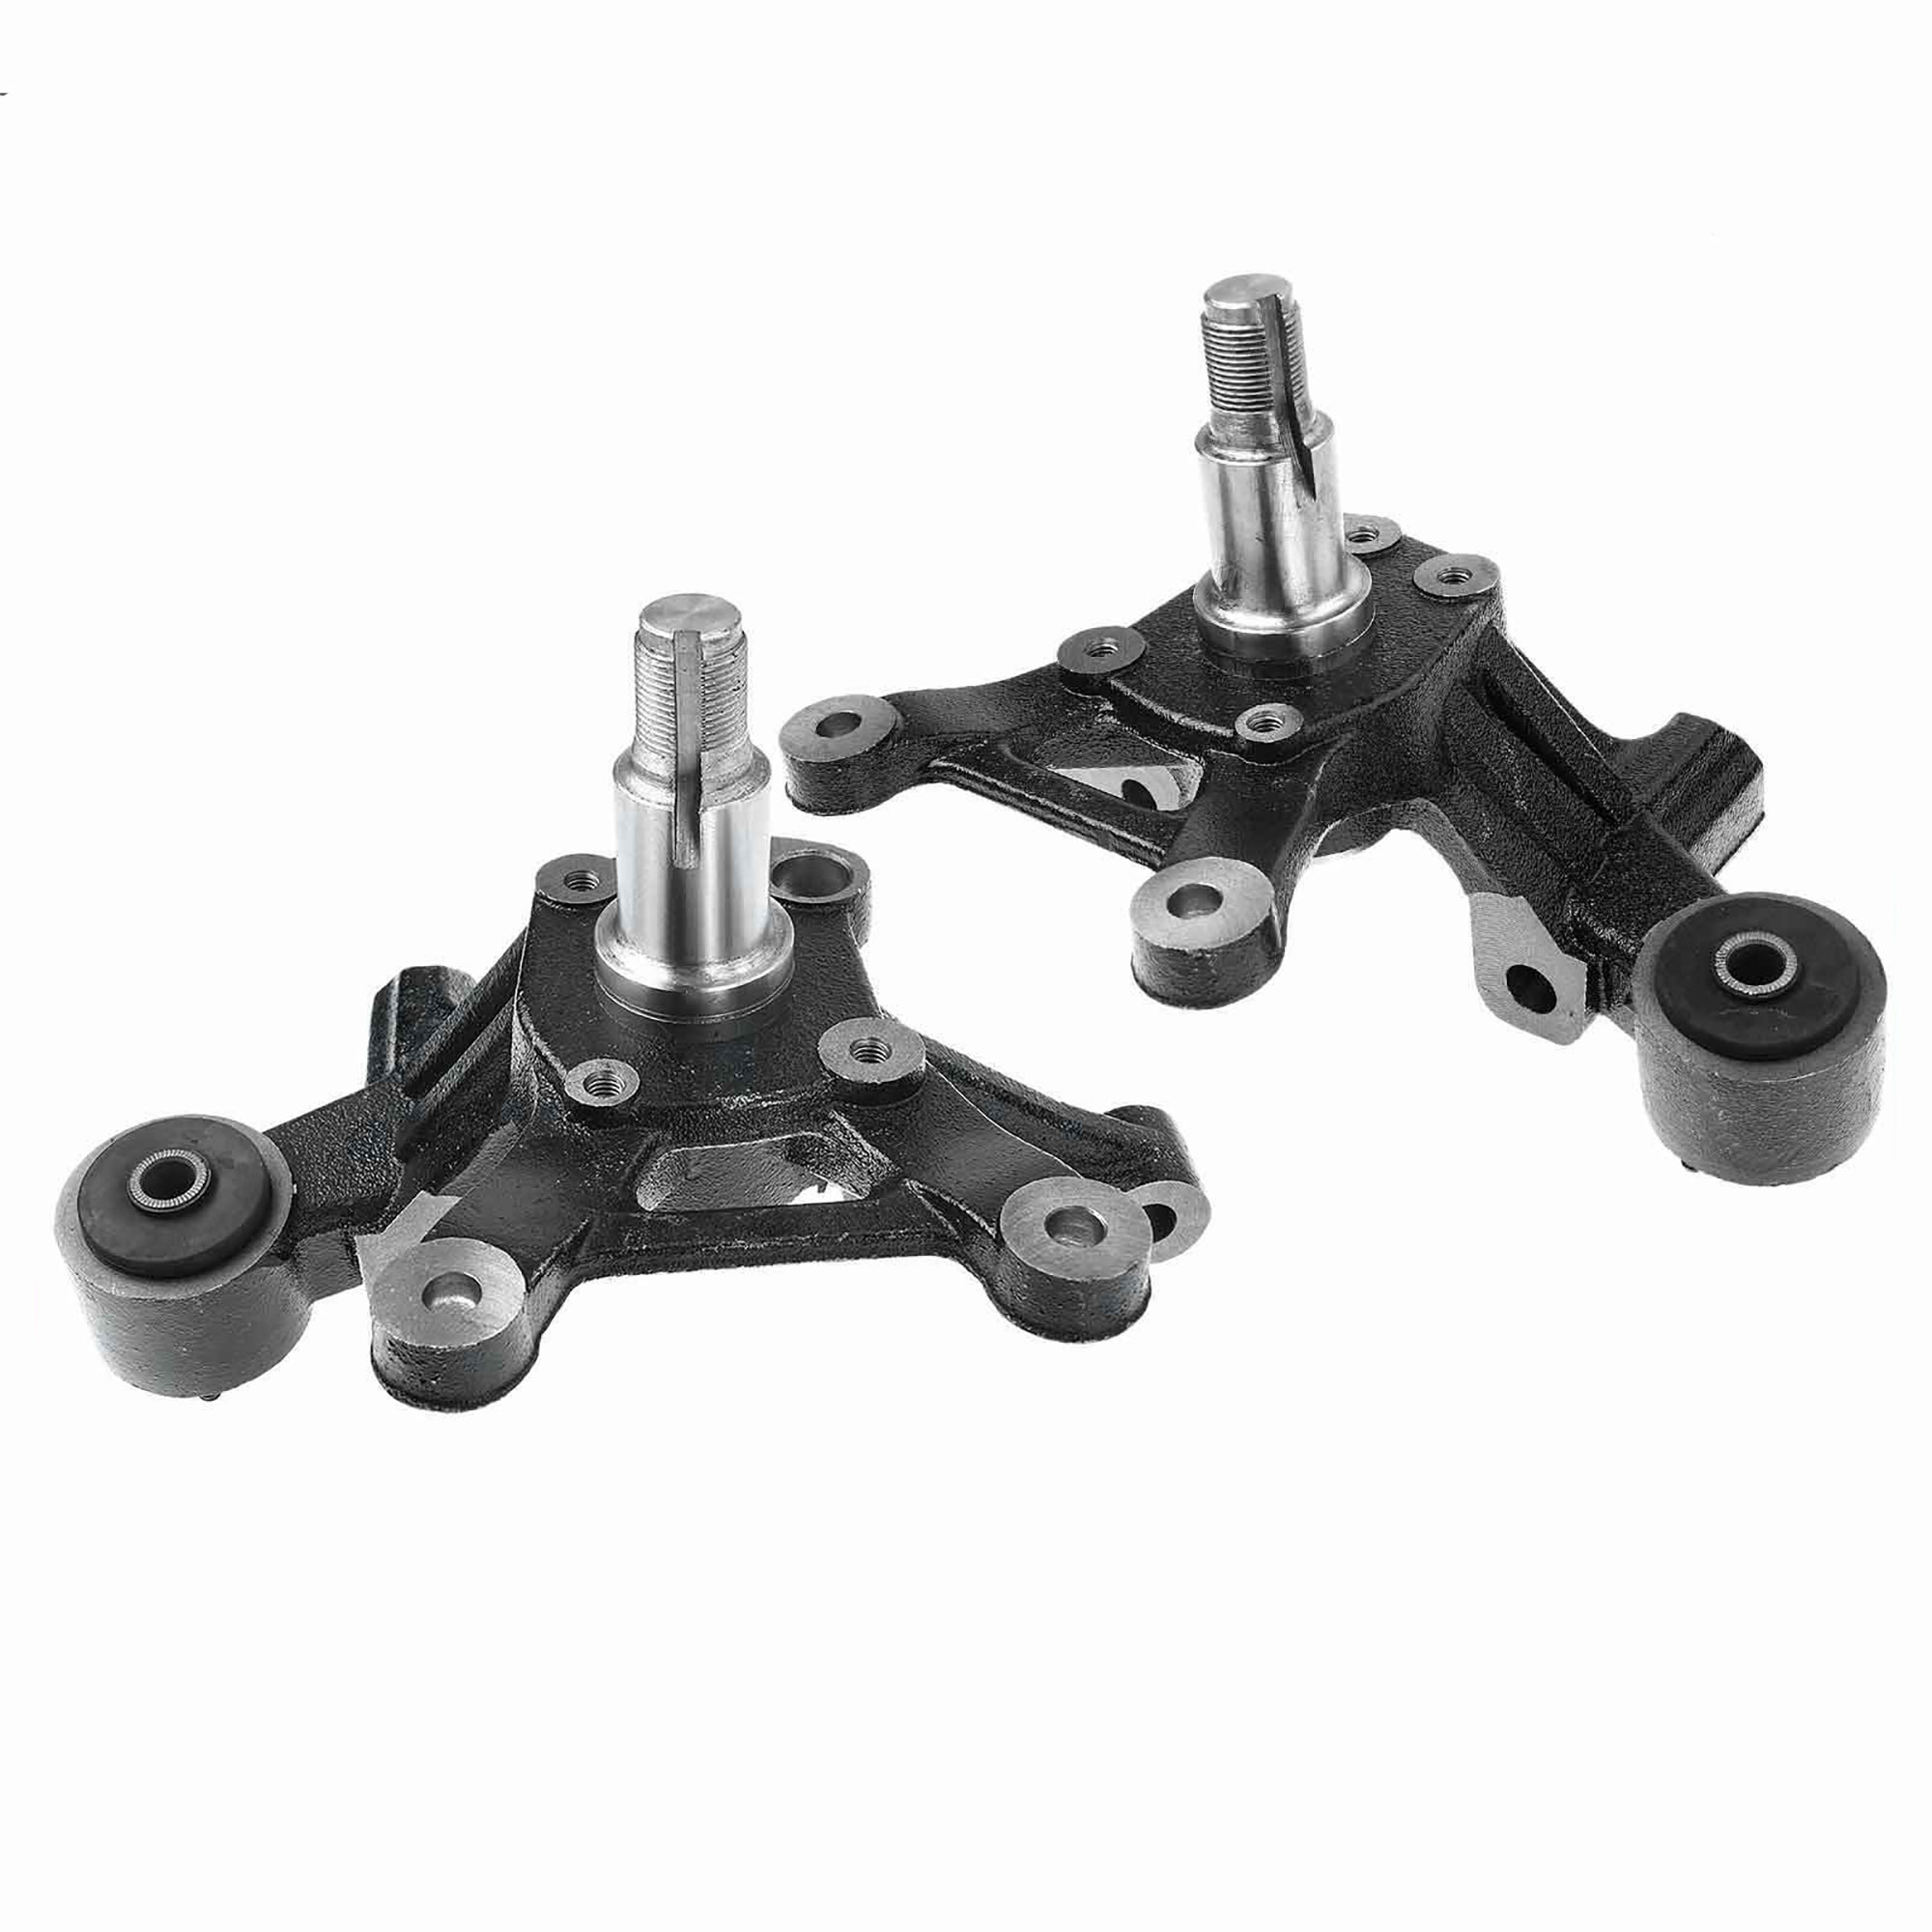 2PCs Rear Left Driver & Right Passenger Side Axle Carrier Steering Spindle Knuckle With Disc Brakes For  2003-2006 Hyundai Elantra Tiburon Replace For  698-003 527502D105 698-002 527602D105 - image 2 of 6